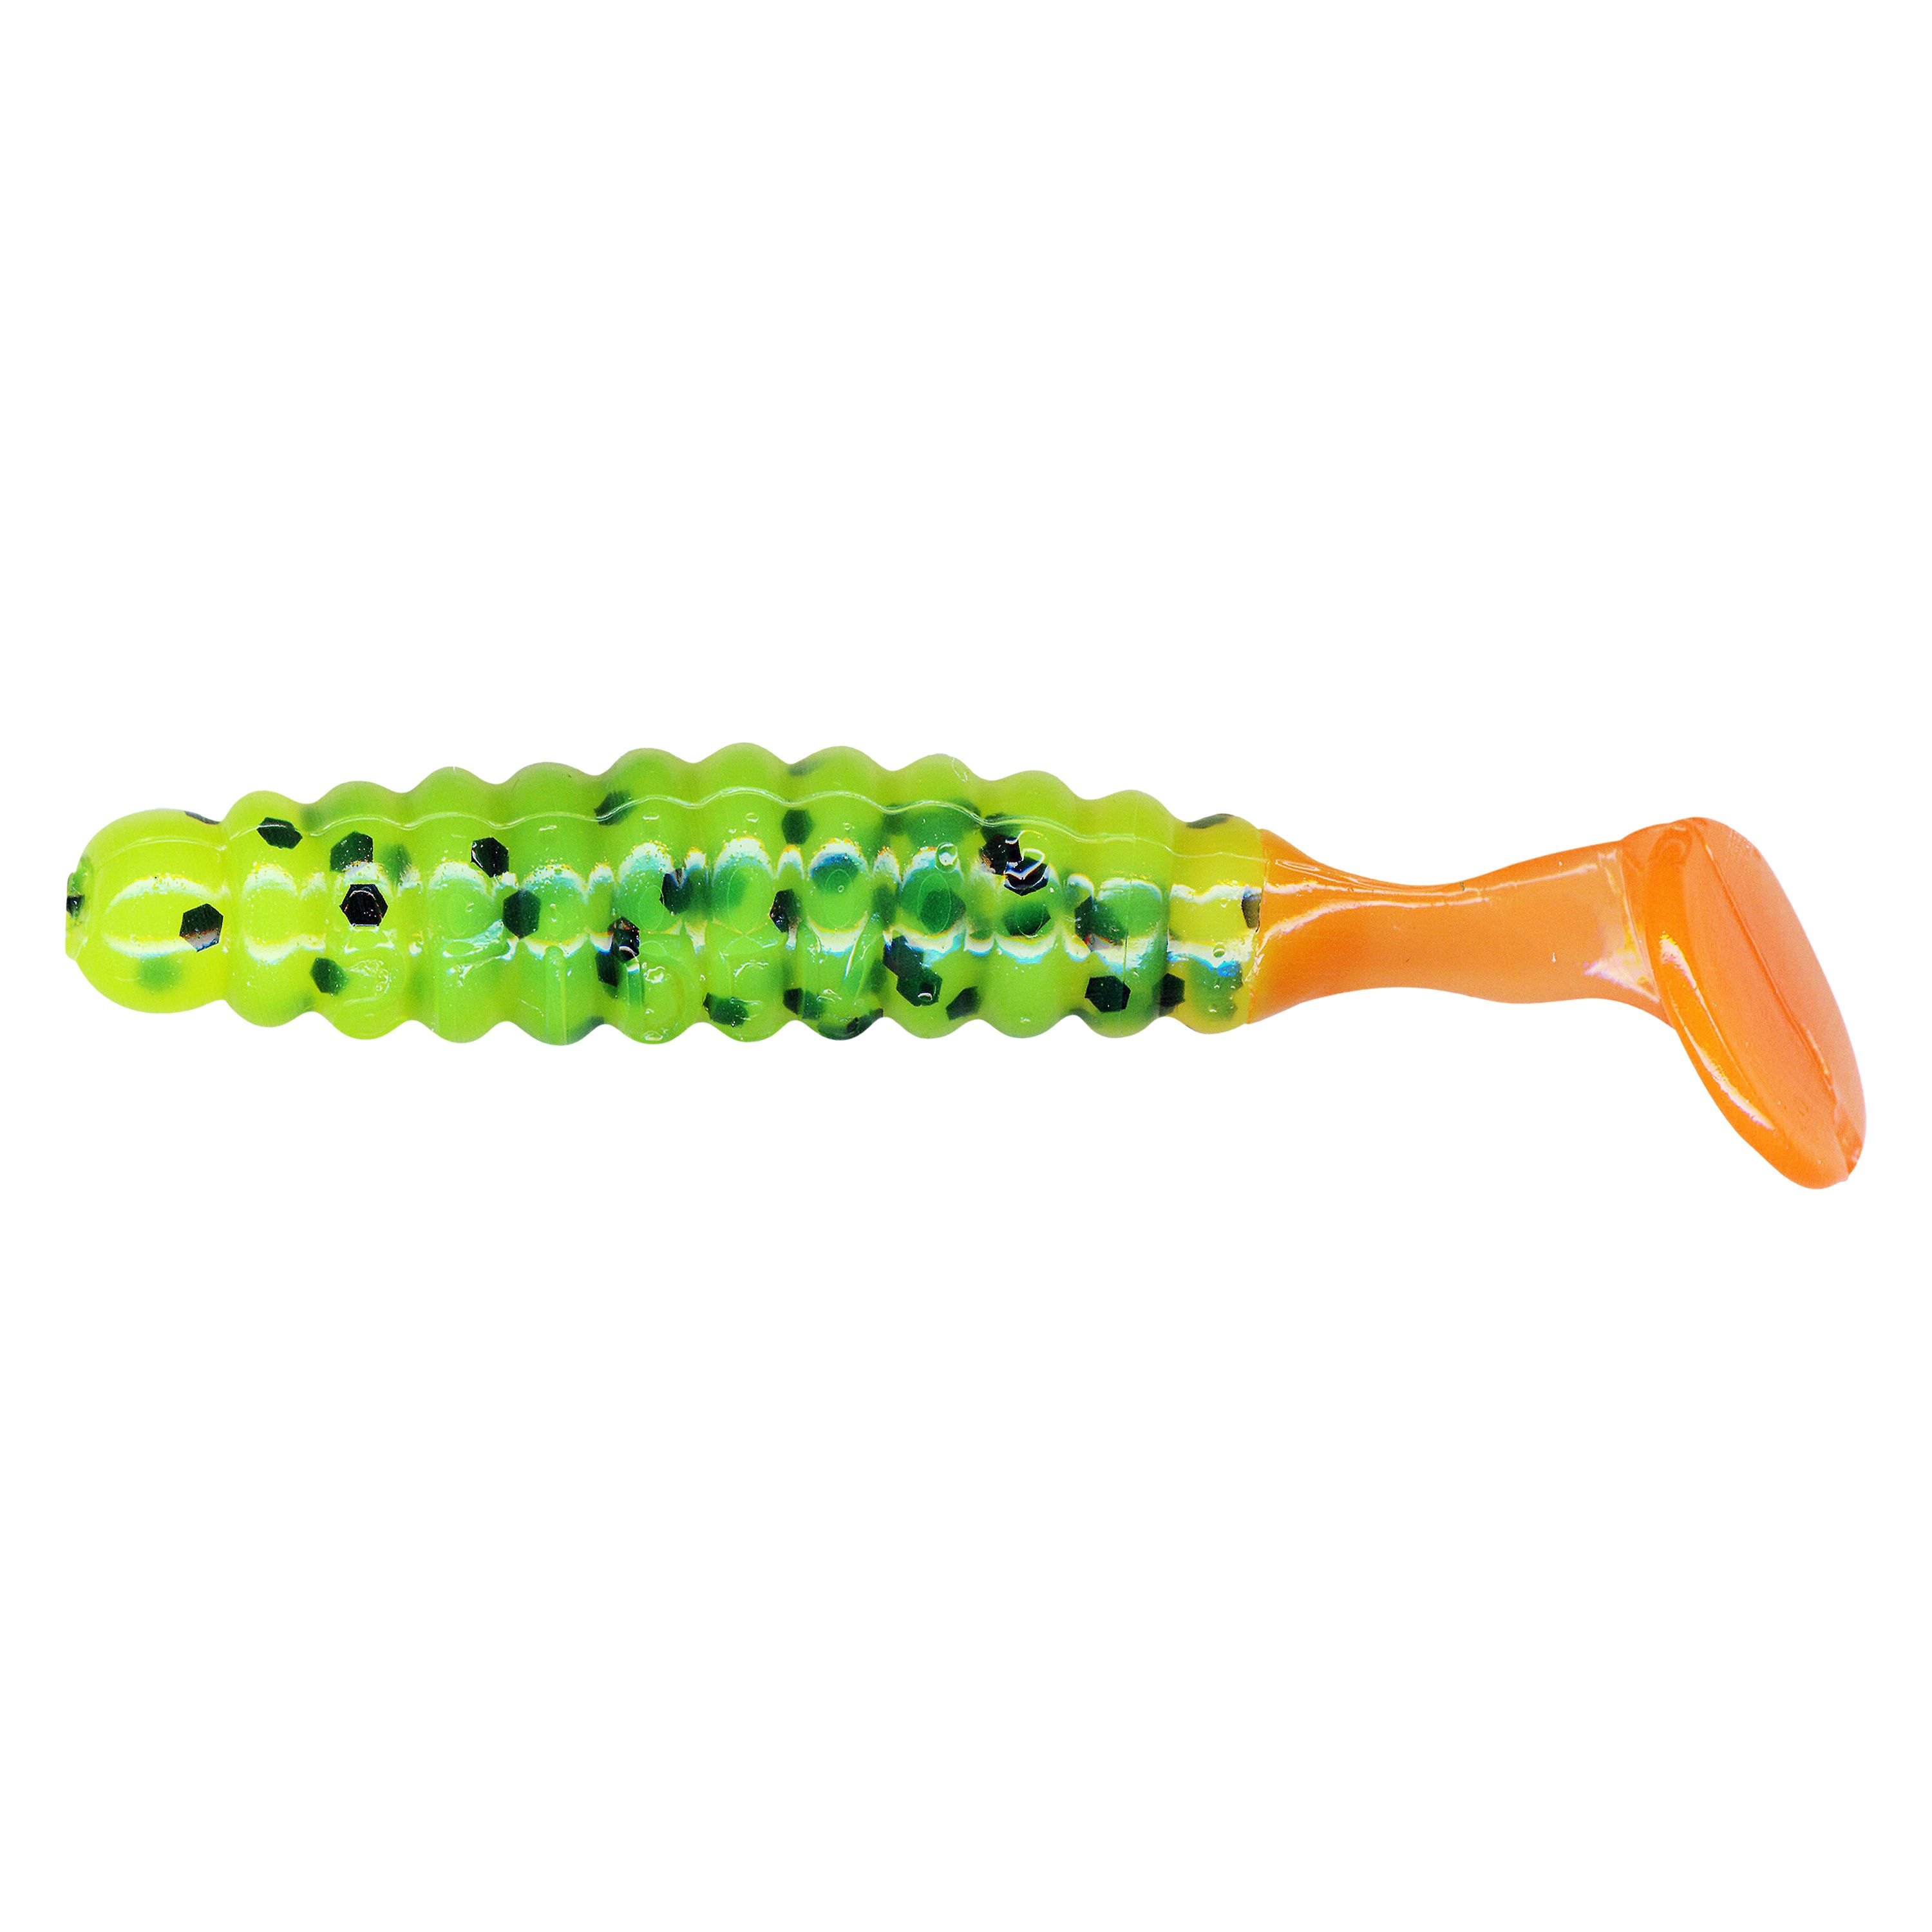 Slider CSGGF15 Crappie/Panfish Grub With Vibratail 1 1/2" Chartreuse 